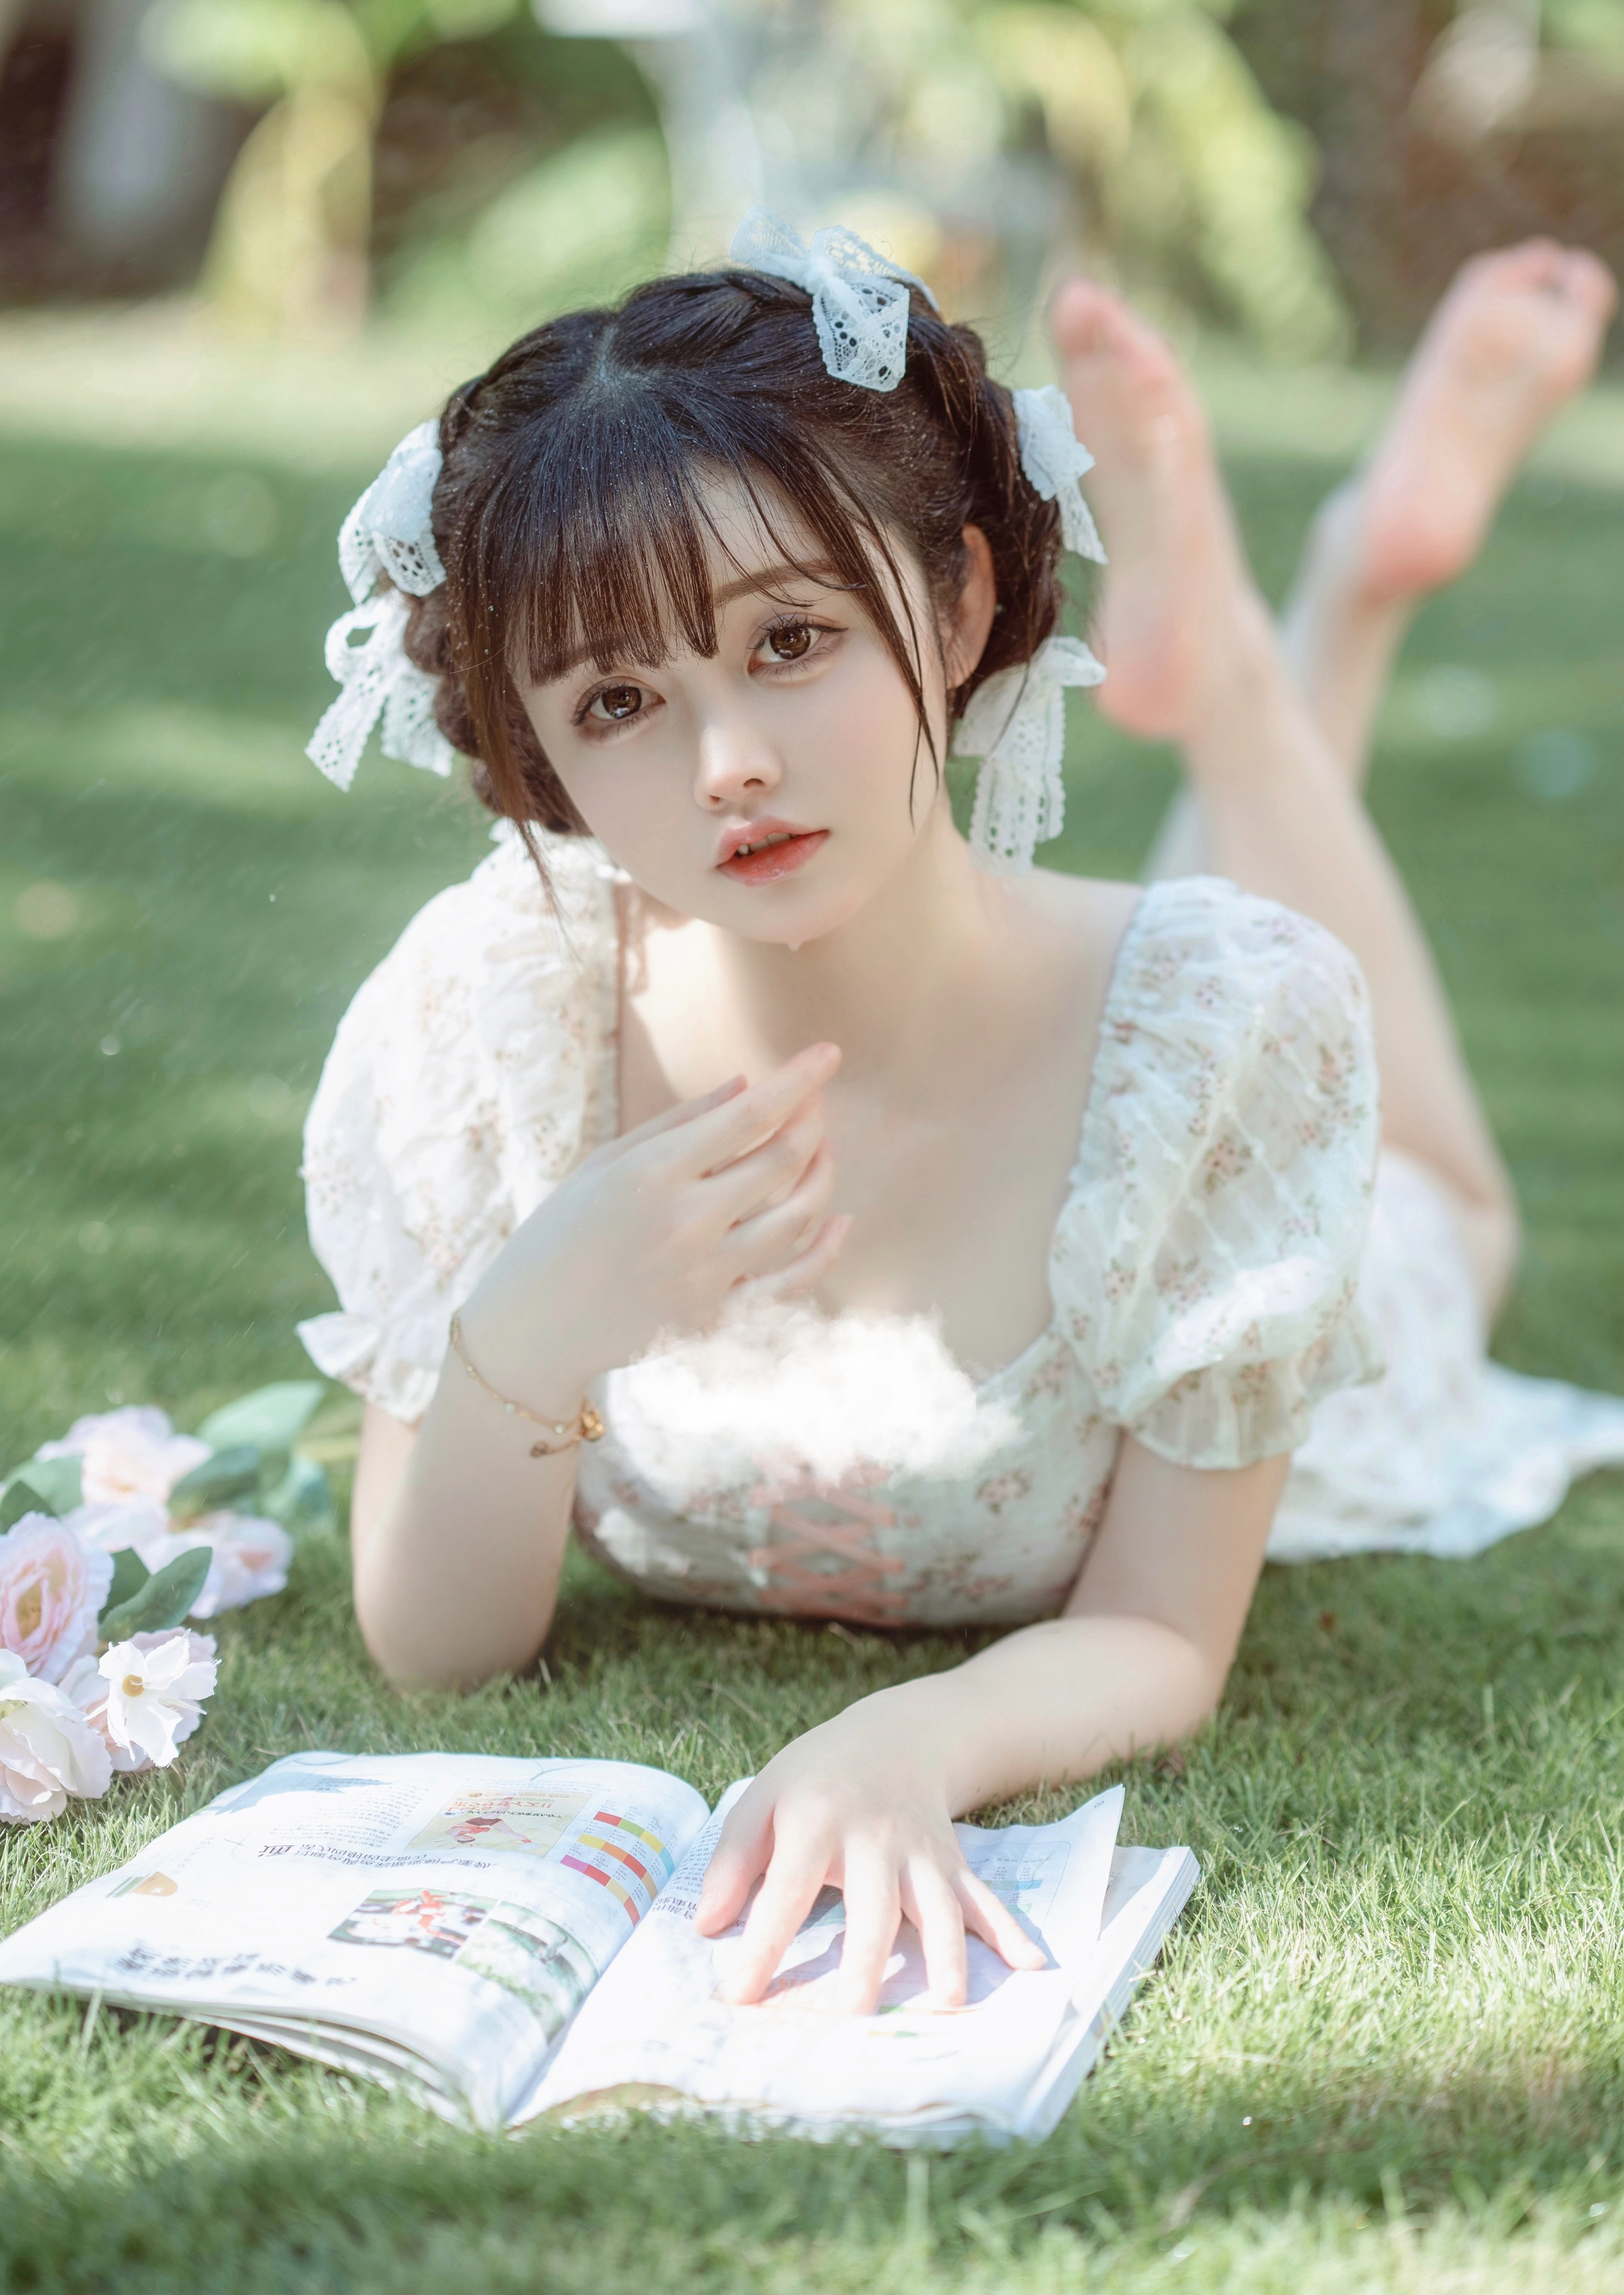 Asian Feet In The Air Lying On Front Feet White Dress 2854x4032